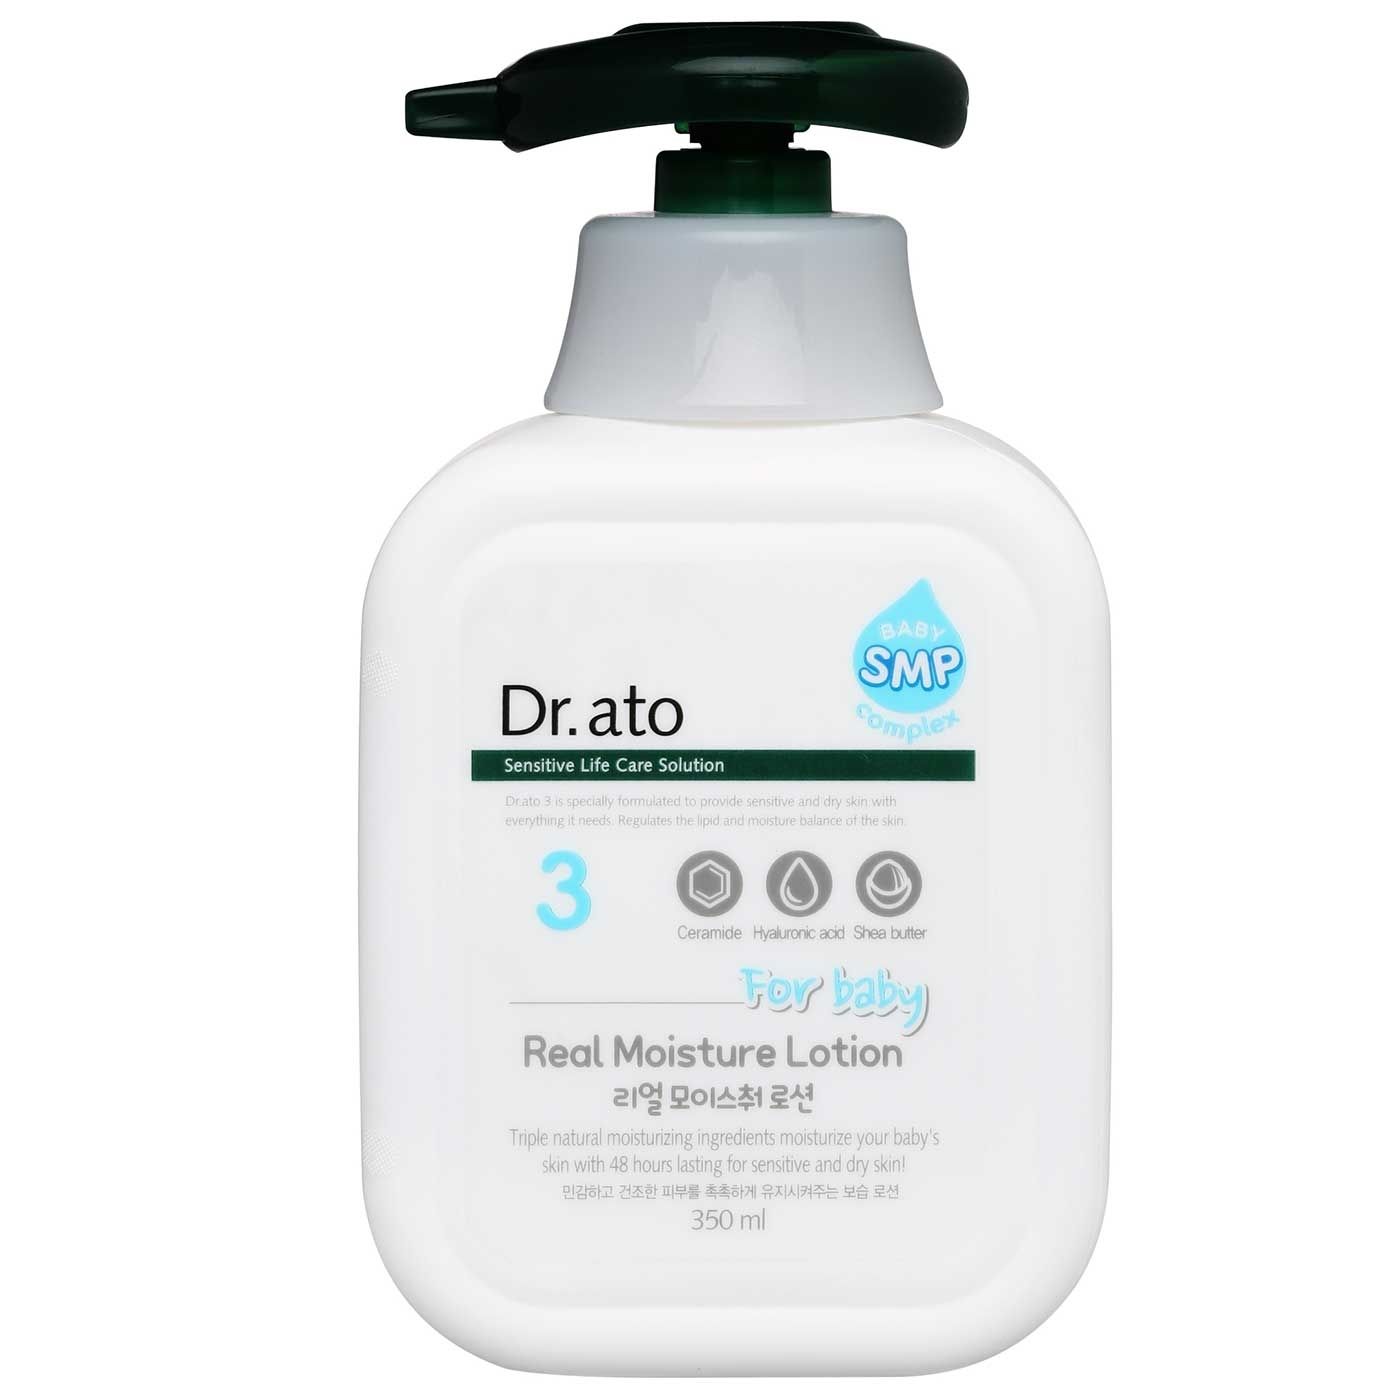 Dr.ato Real Moisture Lotion 350ml - 1